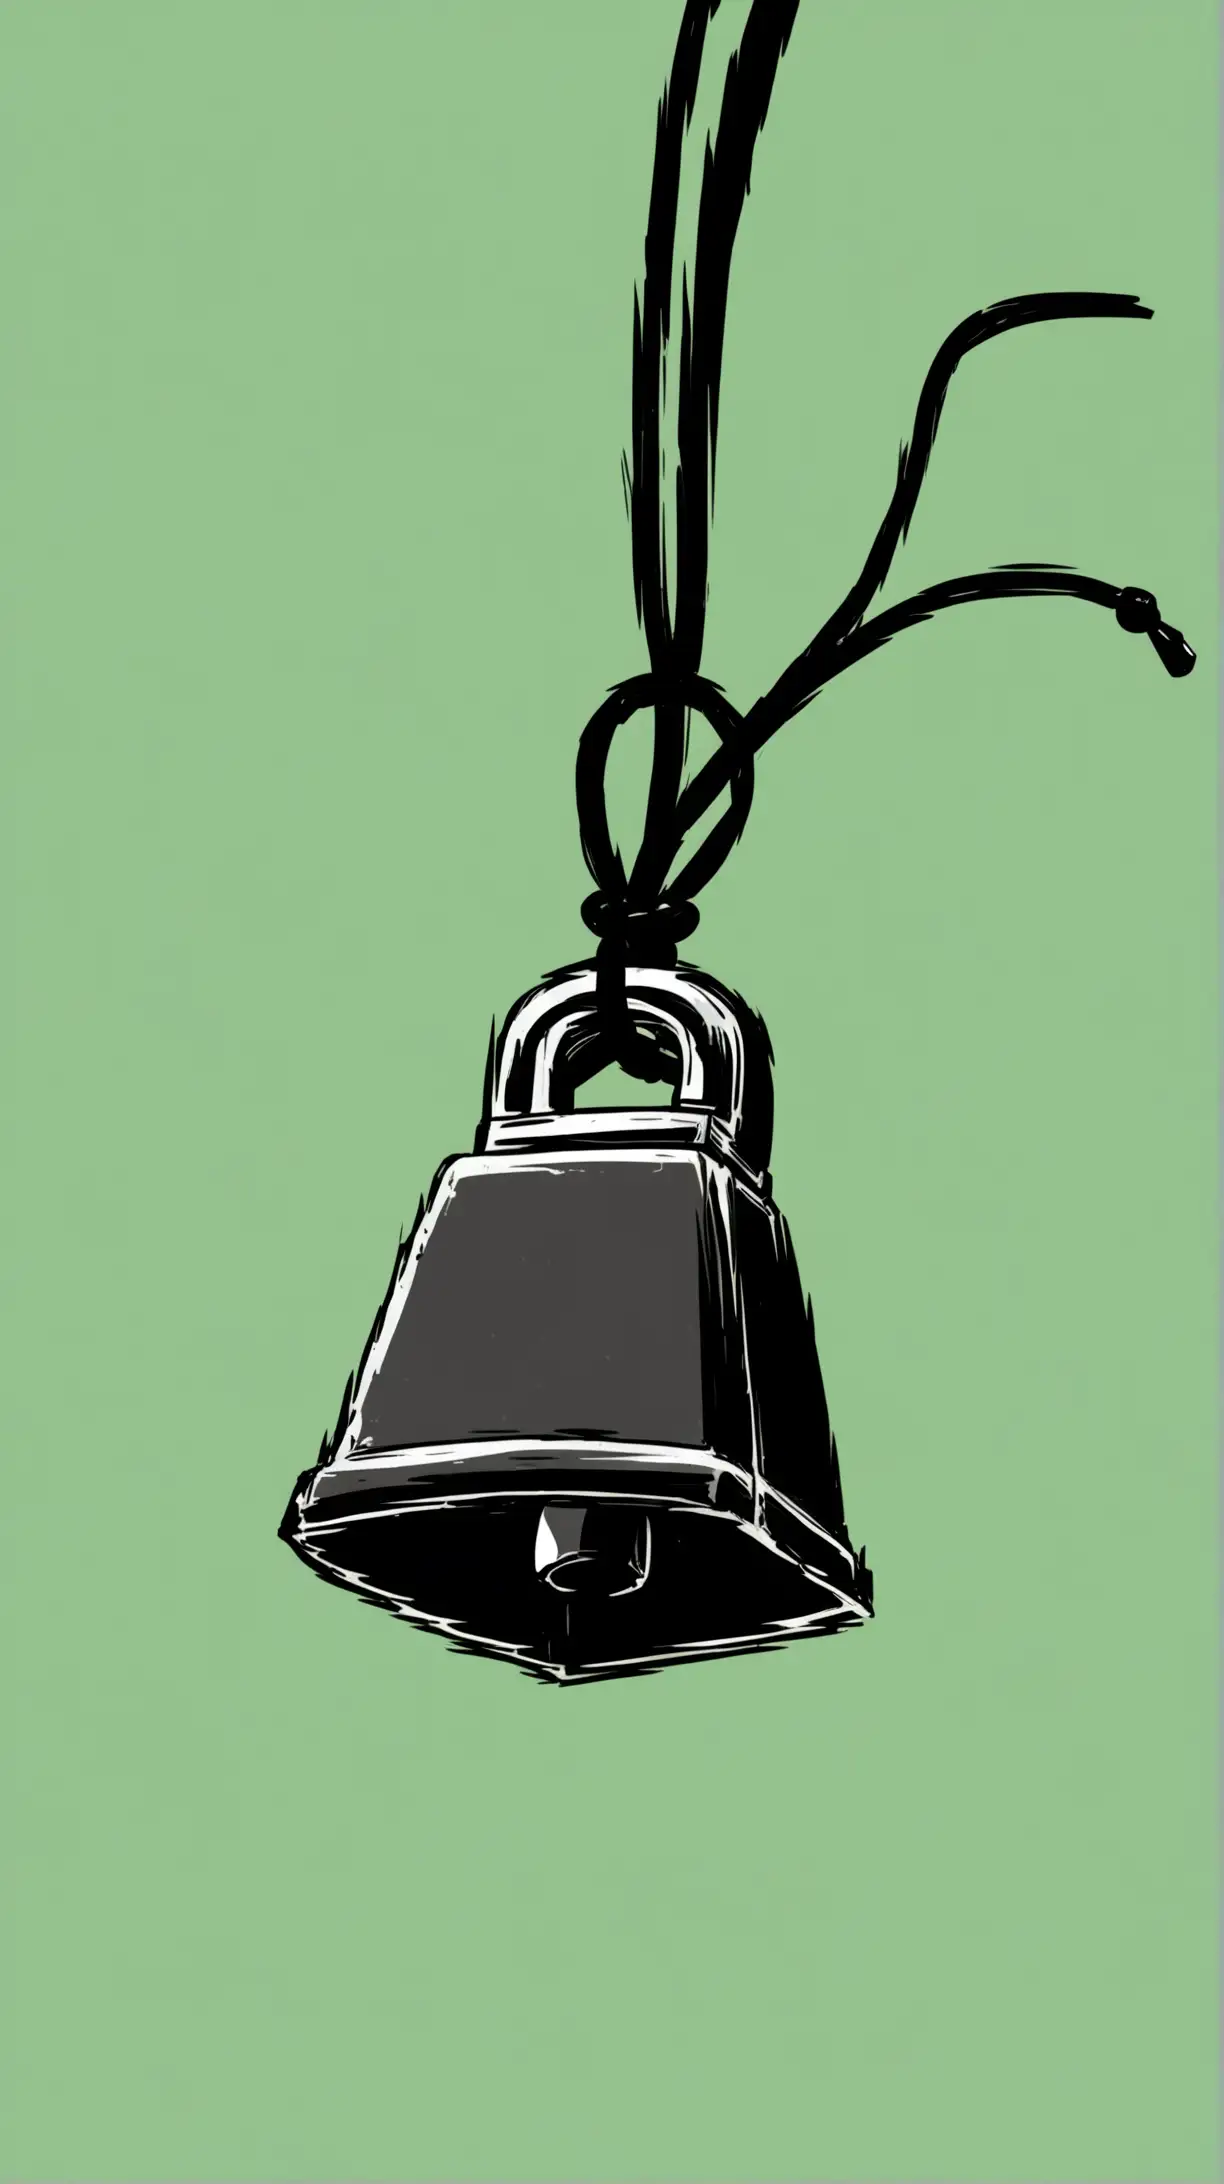 Comic book style. A single black cowbell  with a cord though it,, on a simple background